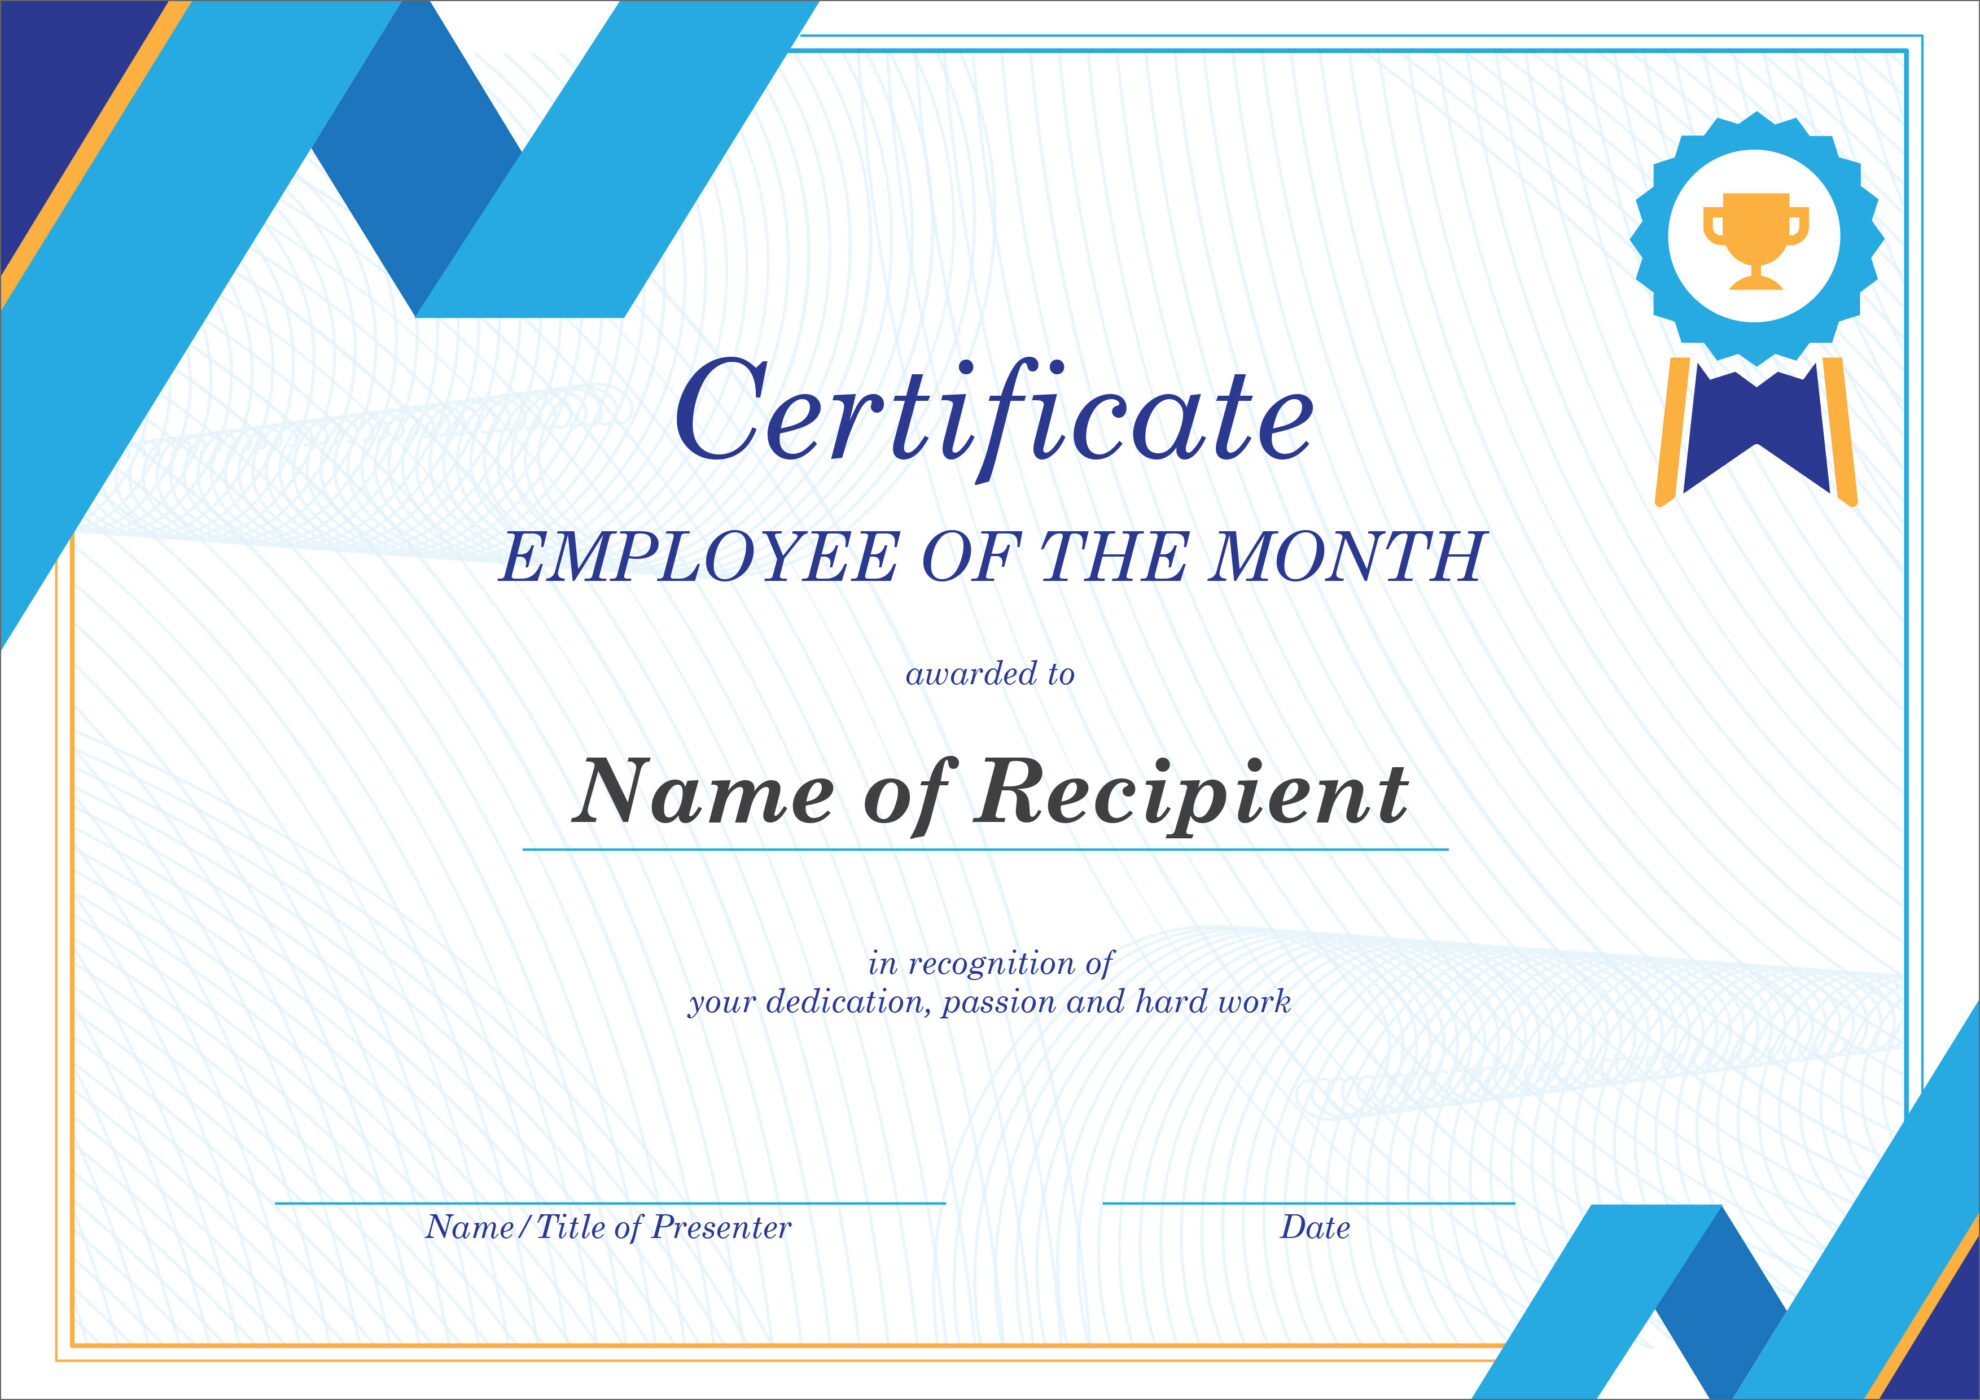 50-free-creative-blank-certificate-templates-in-psd-in-employee-of-the